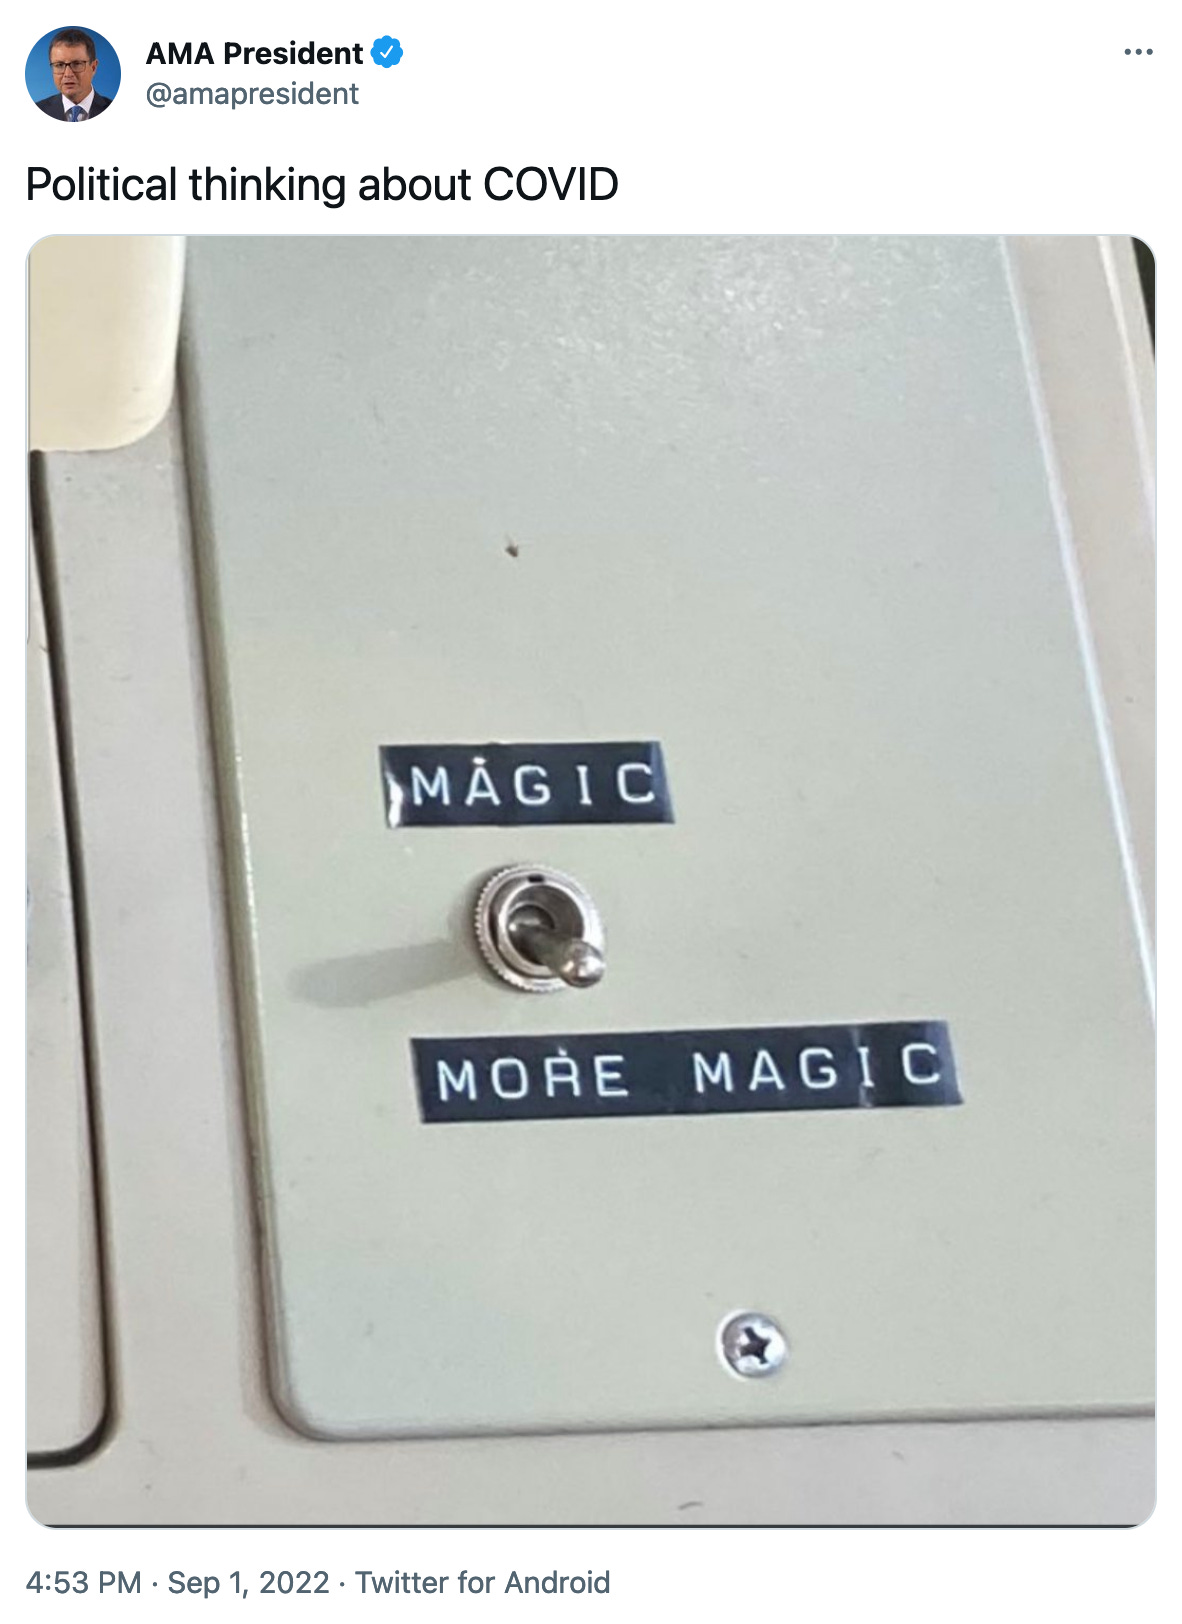 Tweet by Australian Medical Association President. Text says political thinking about Covid. And the picture has a lever switch in the down position, the up position is labeled with a label maker label that says magic, in the down on position the label says more magic